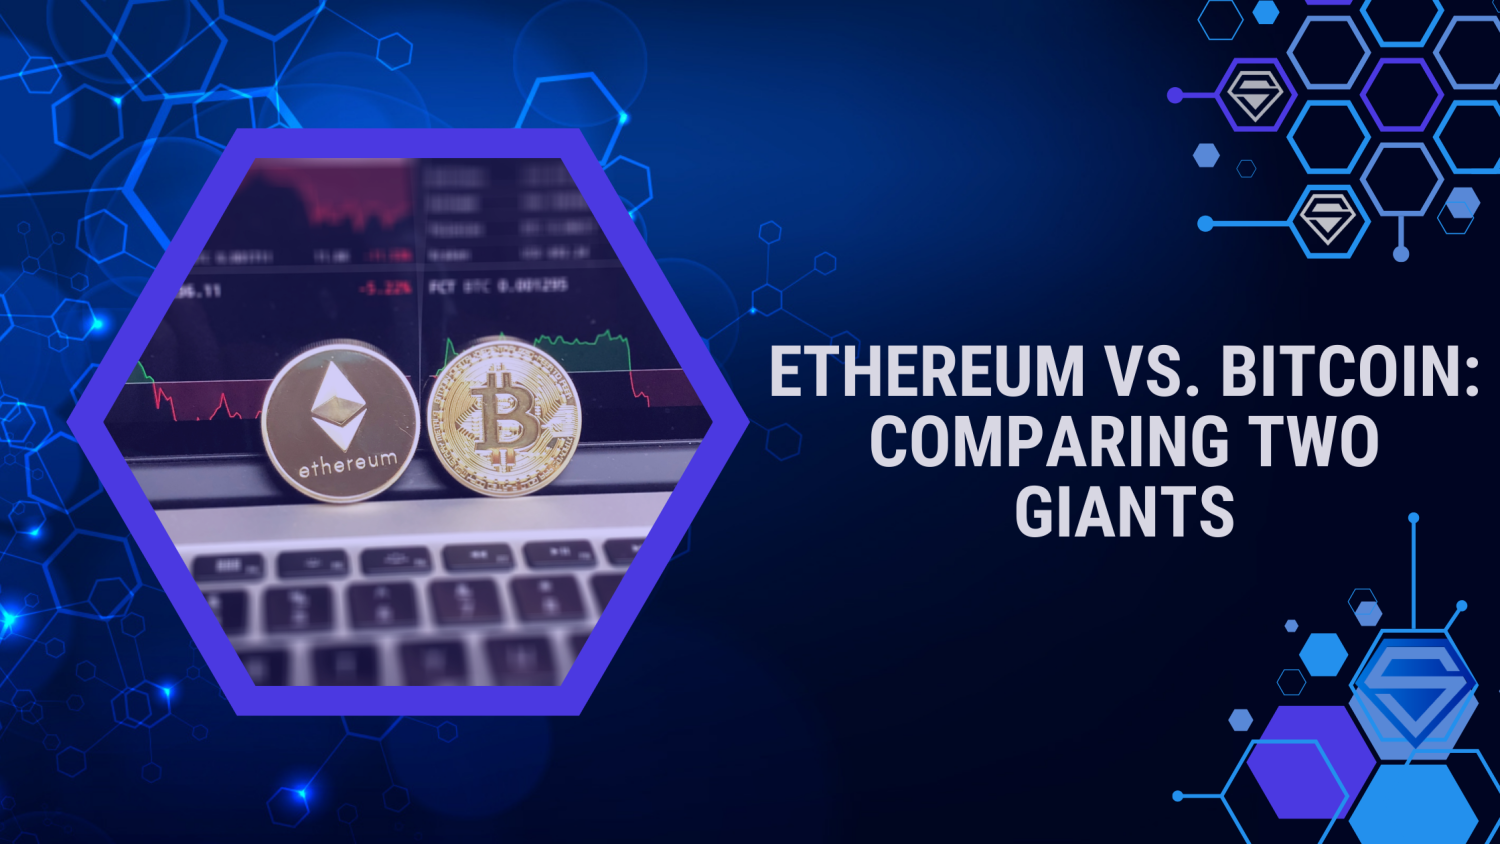 Ethereum vs. Bitcoin: Comparing Two Giants